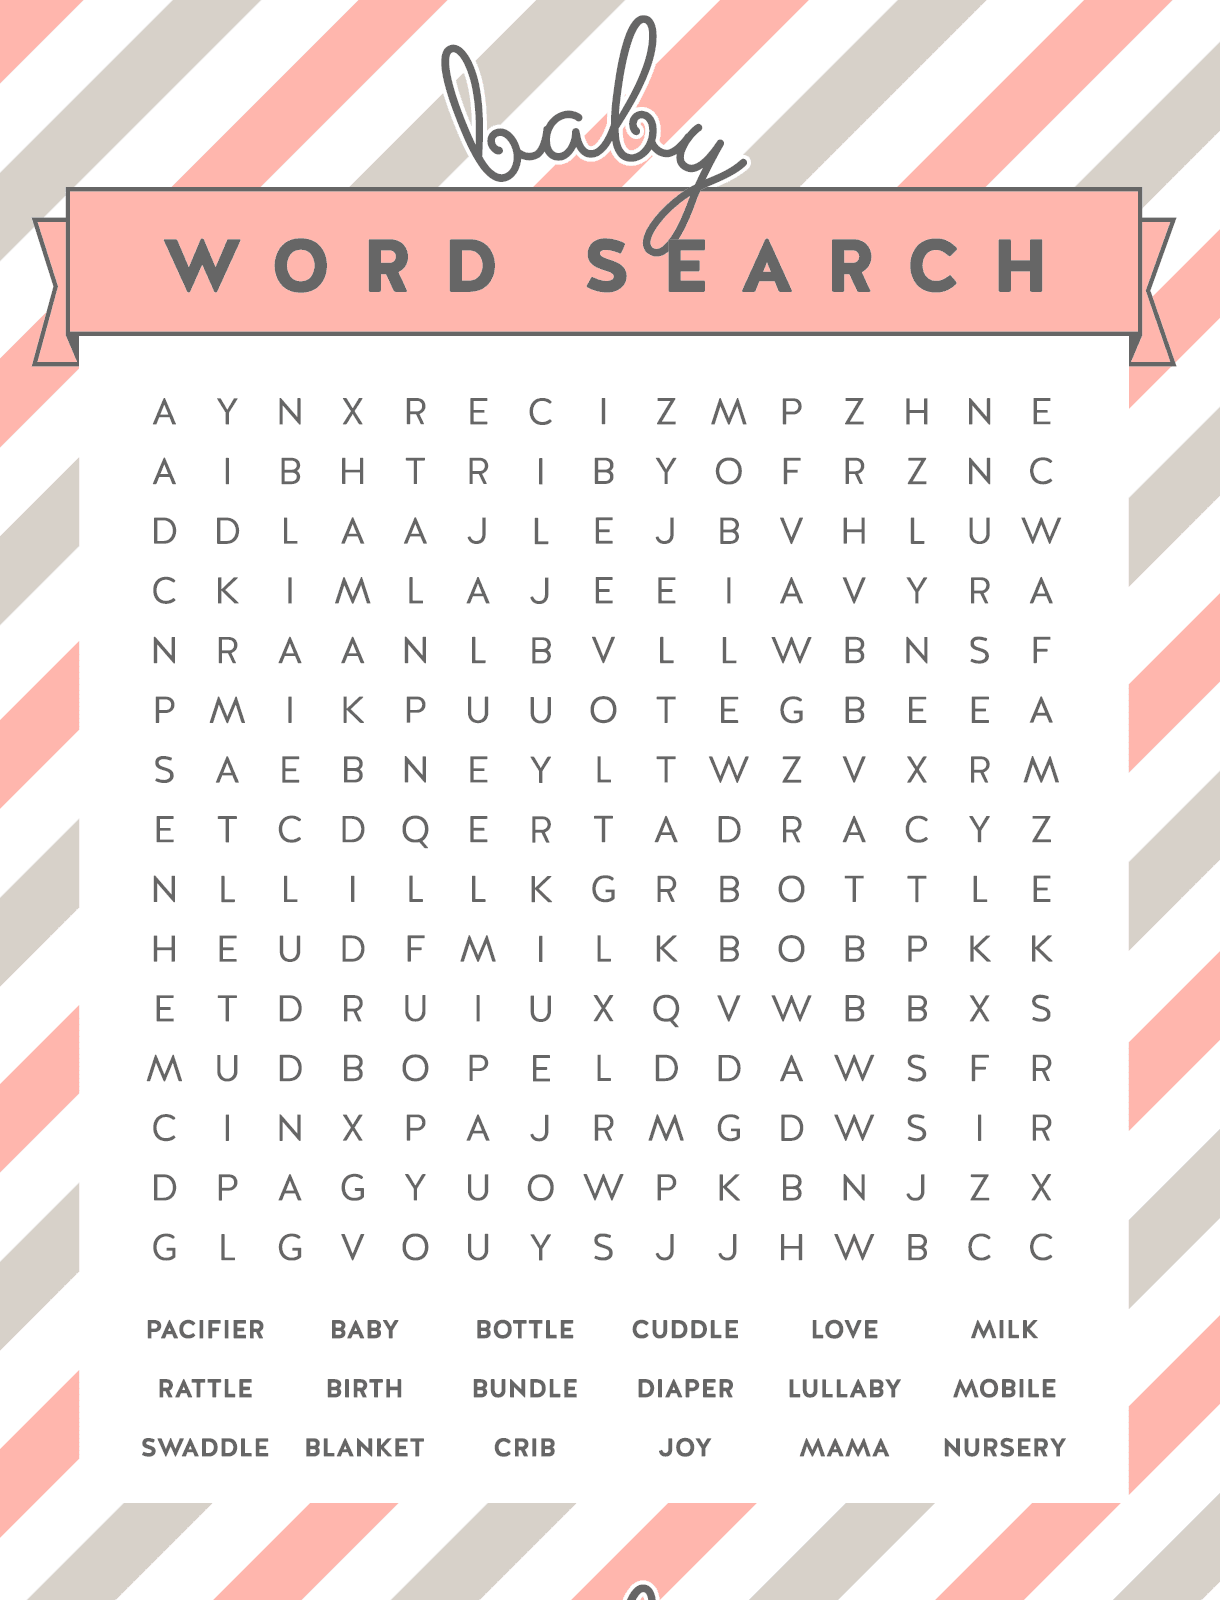 Word search printable for game